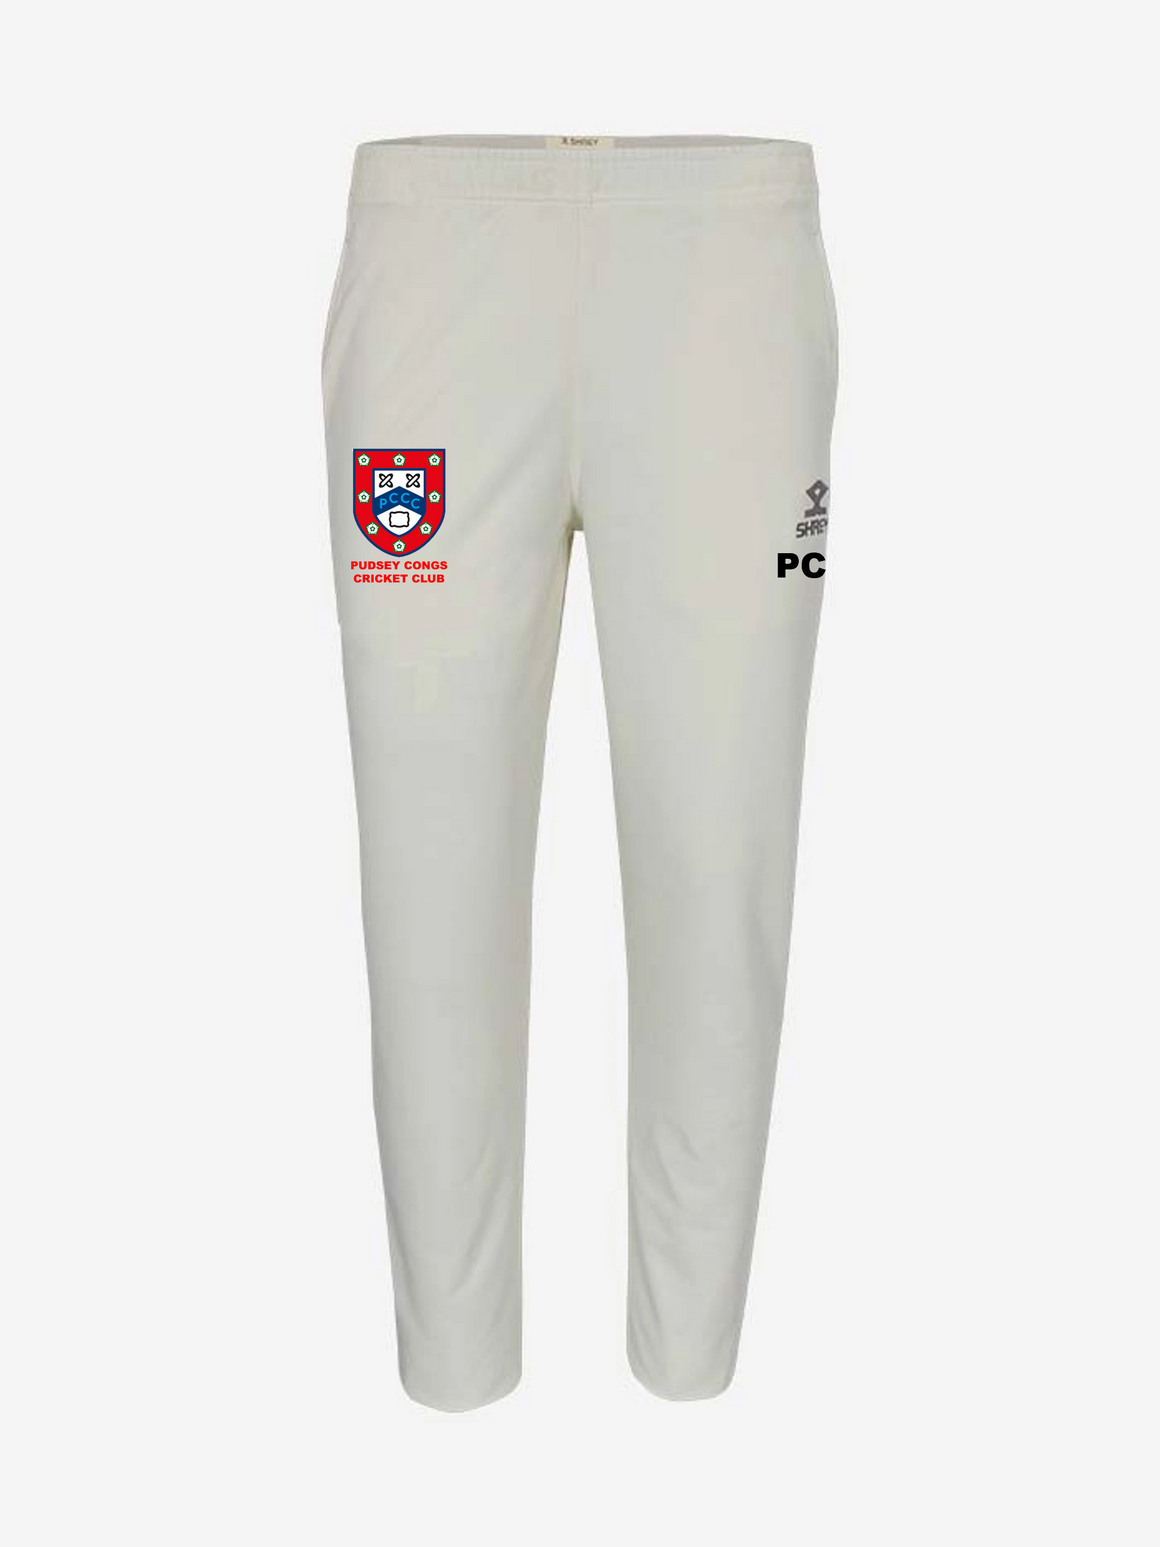 Pudsey Congs C.C. Elite Playing Trousers